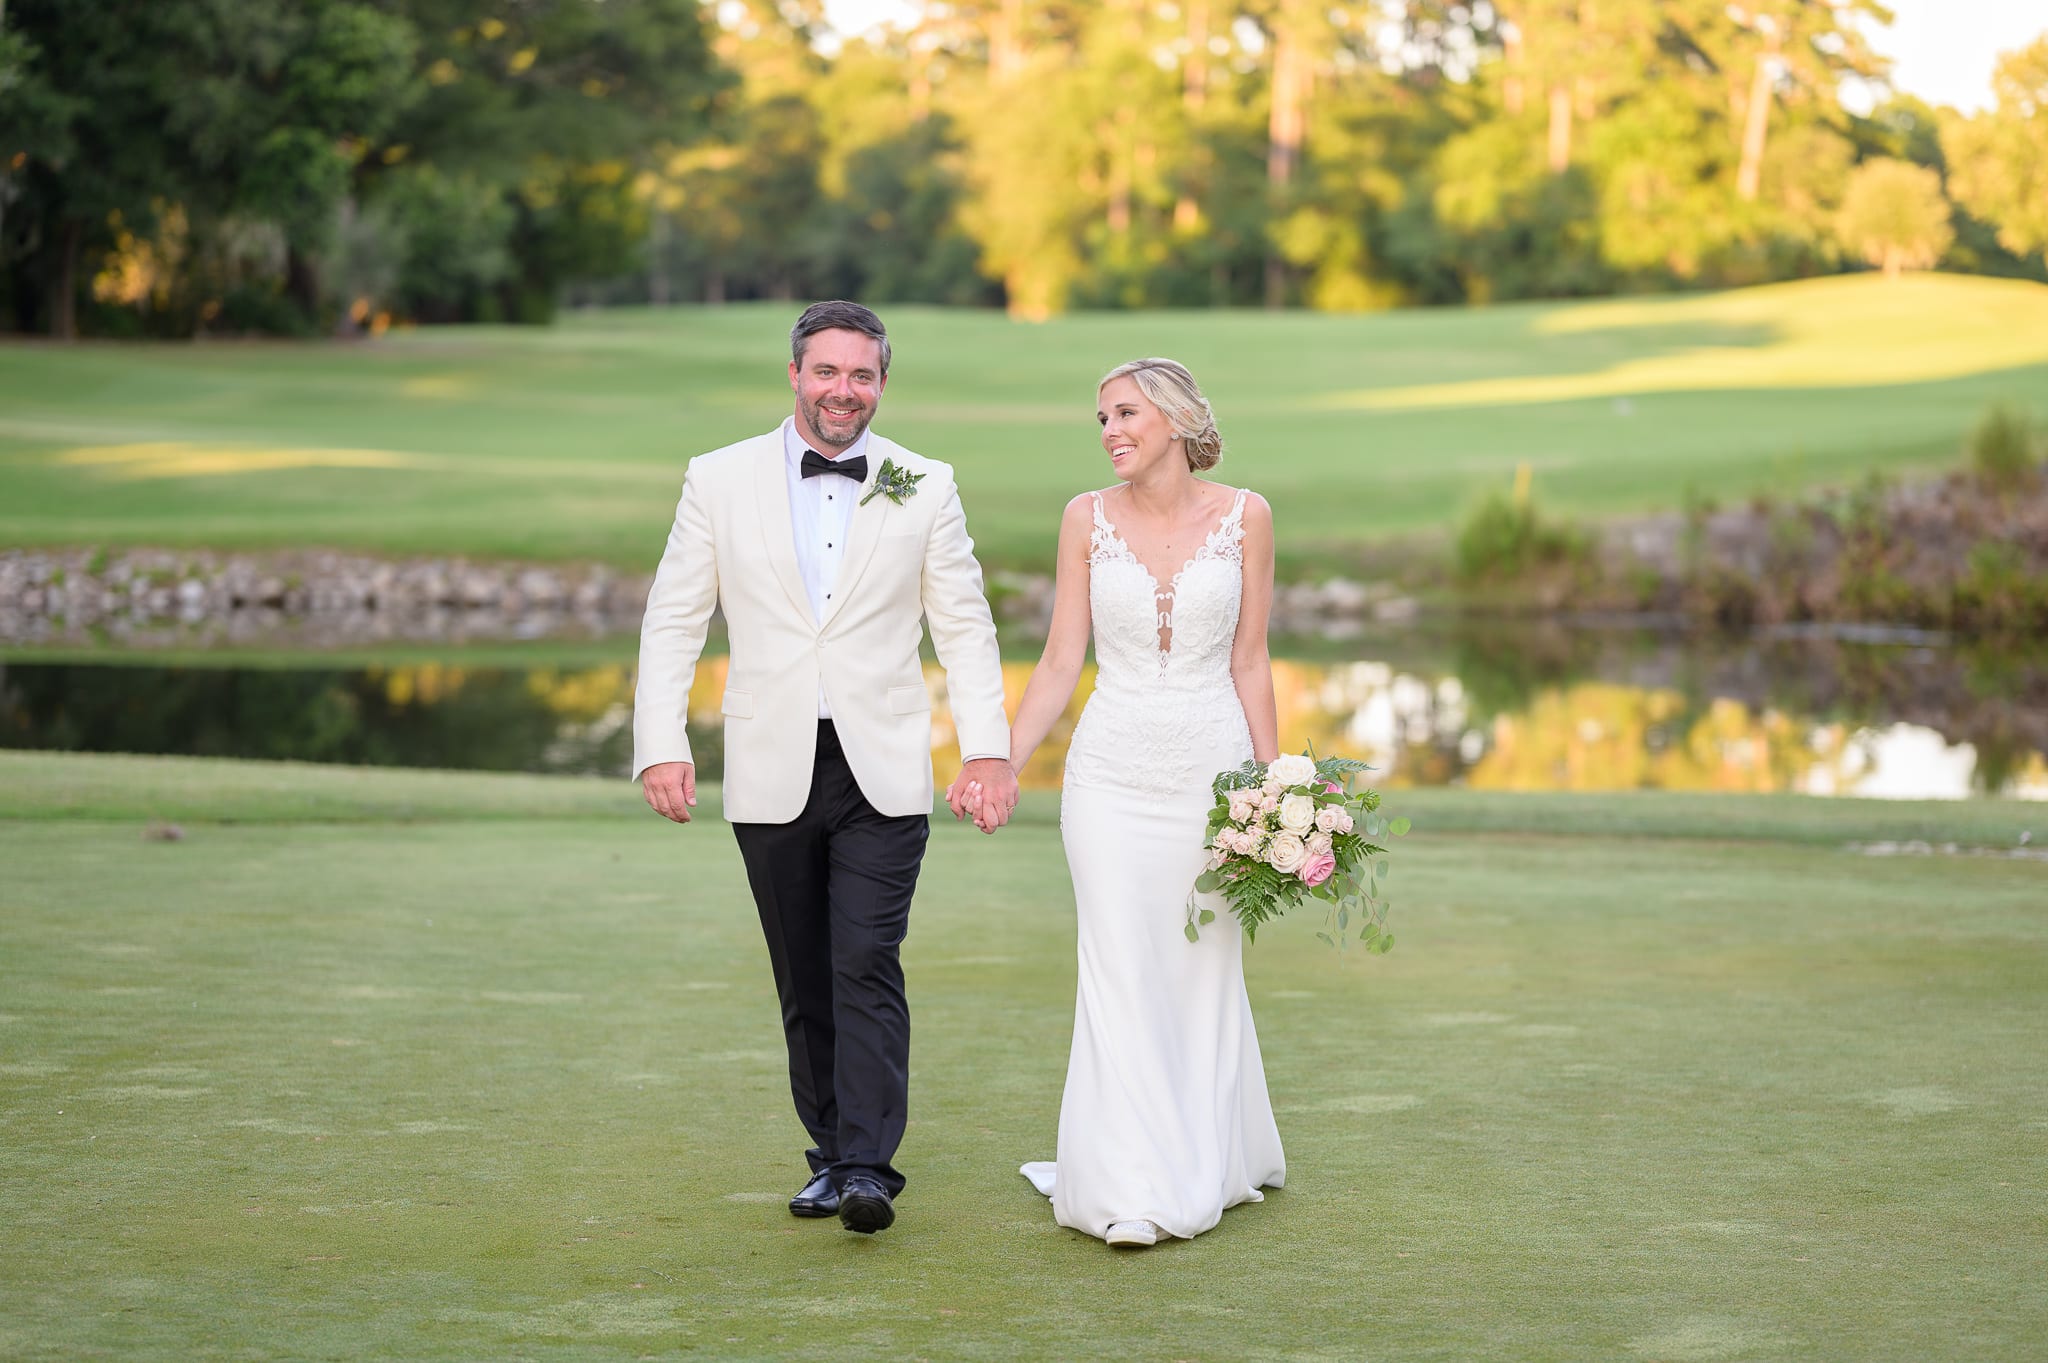 Bride and groom walking down the golf course - Caledonia Golf & Fish Club